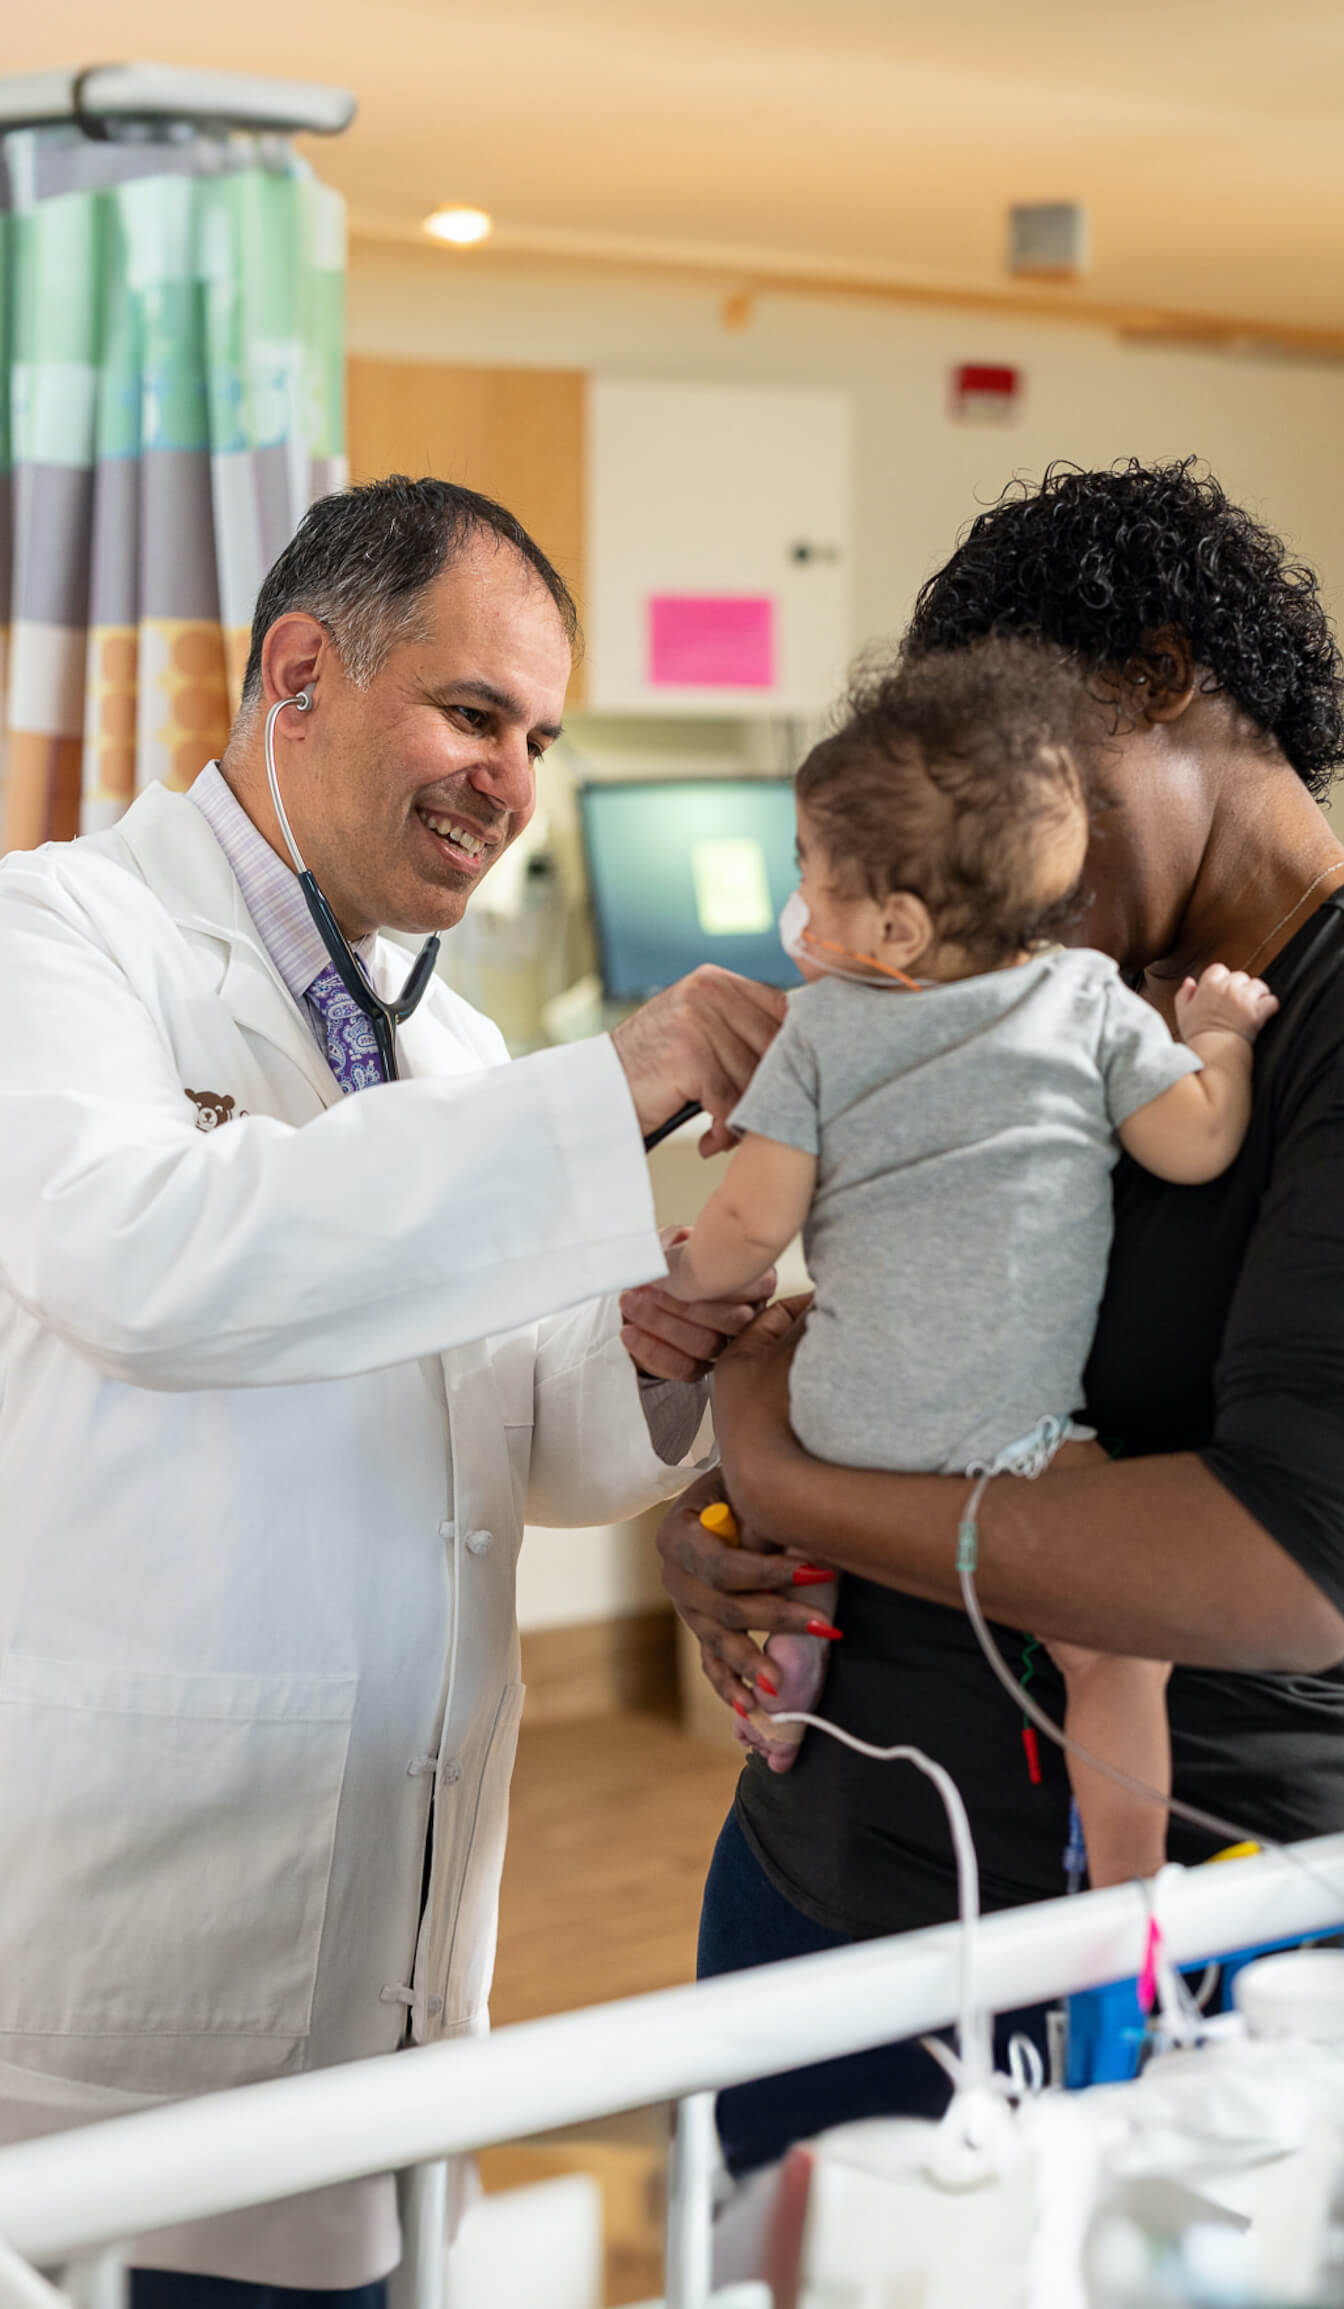 Doctor using stethoscope to check baby's heartbeat in parent's arms.